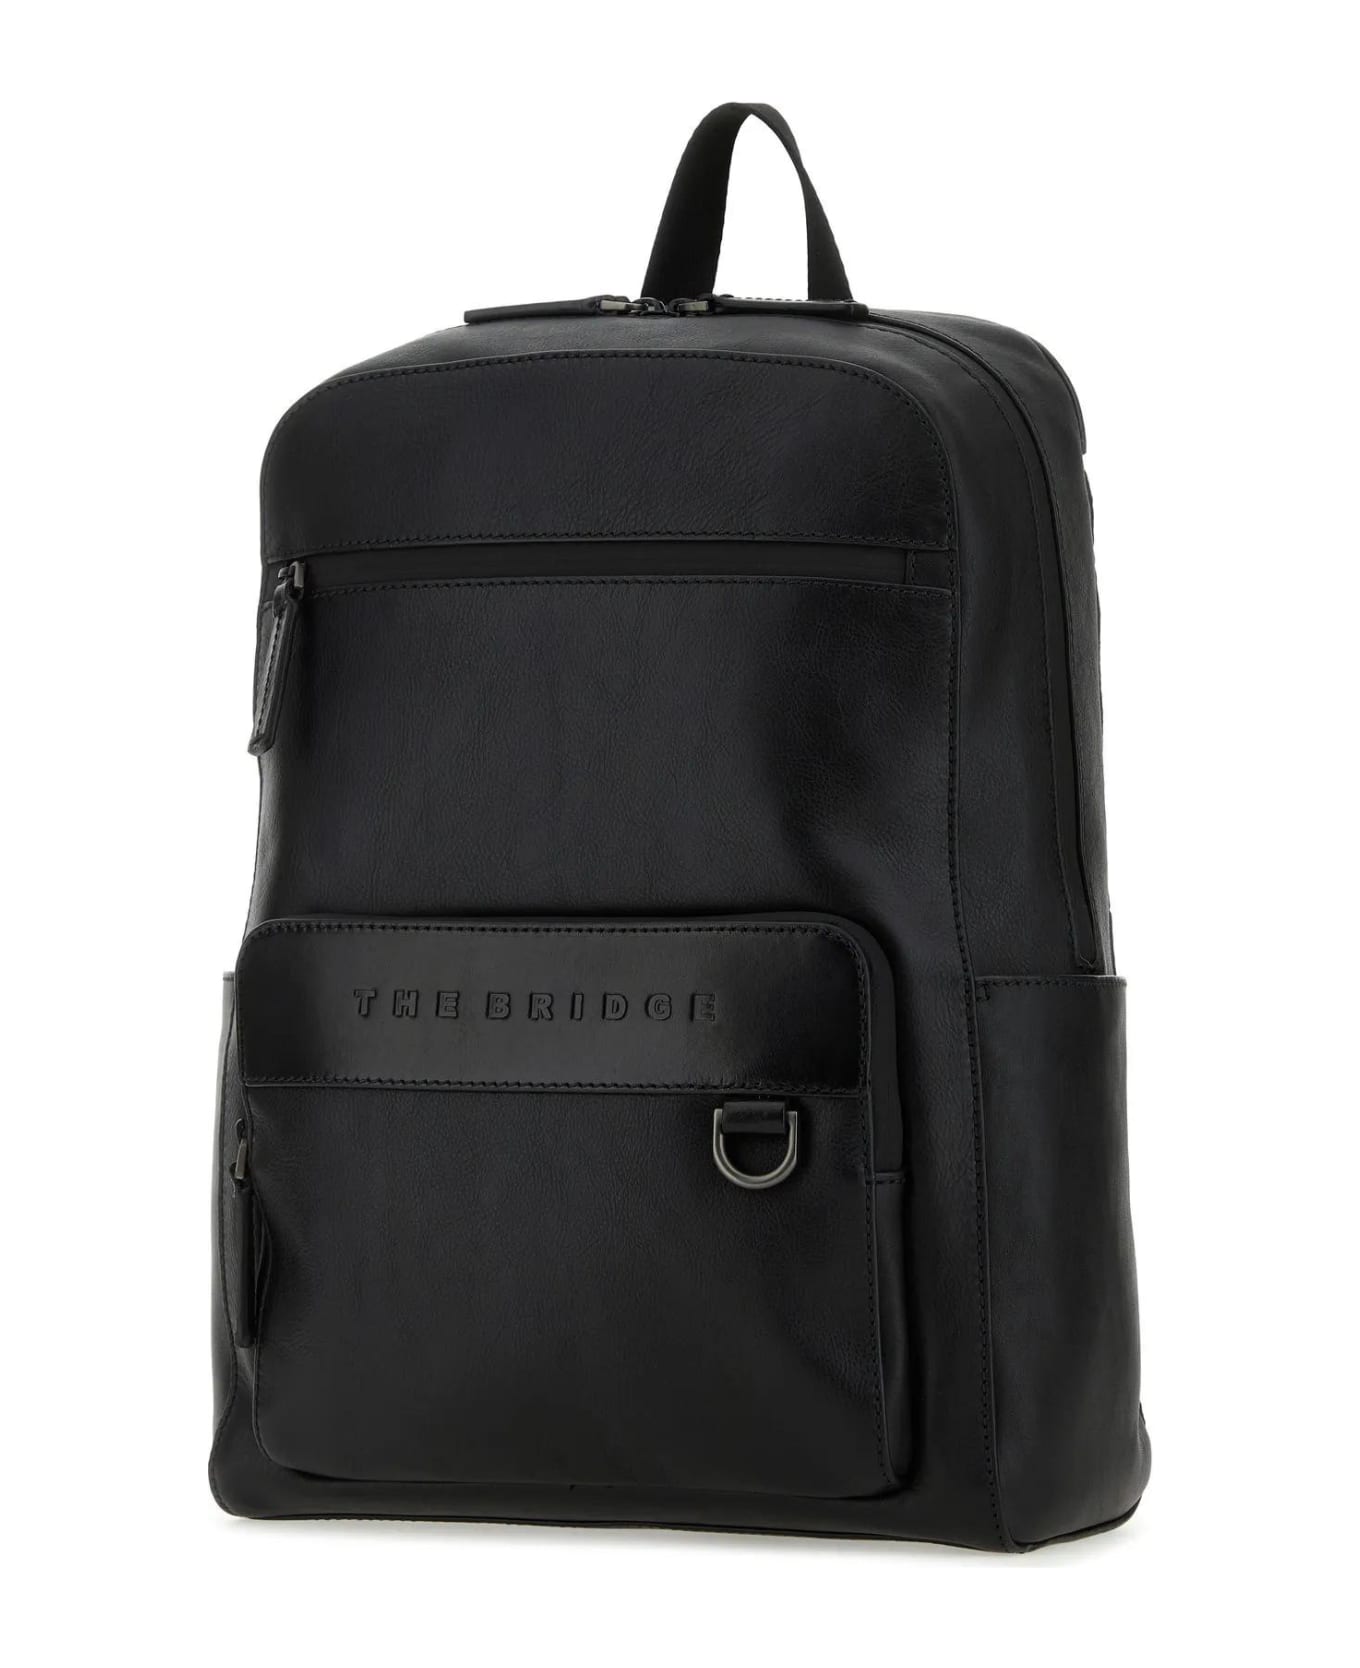 The Bridge Black Leather Damiano Backpack - R Nero バックパック